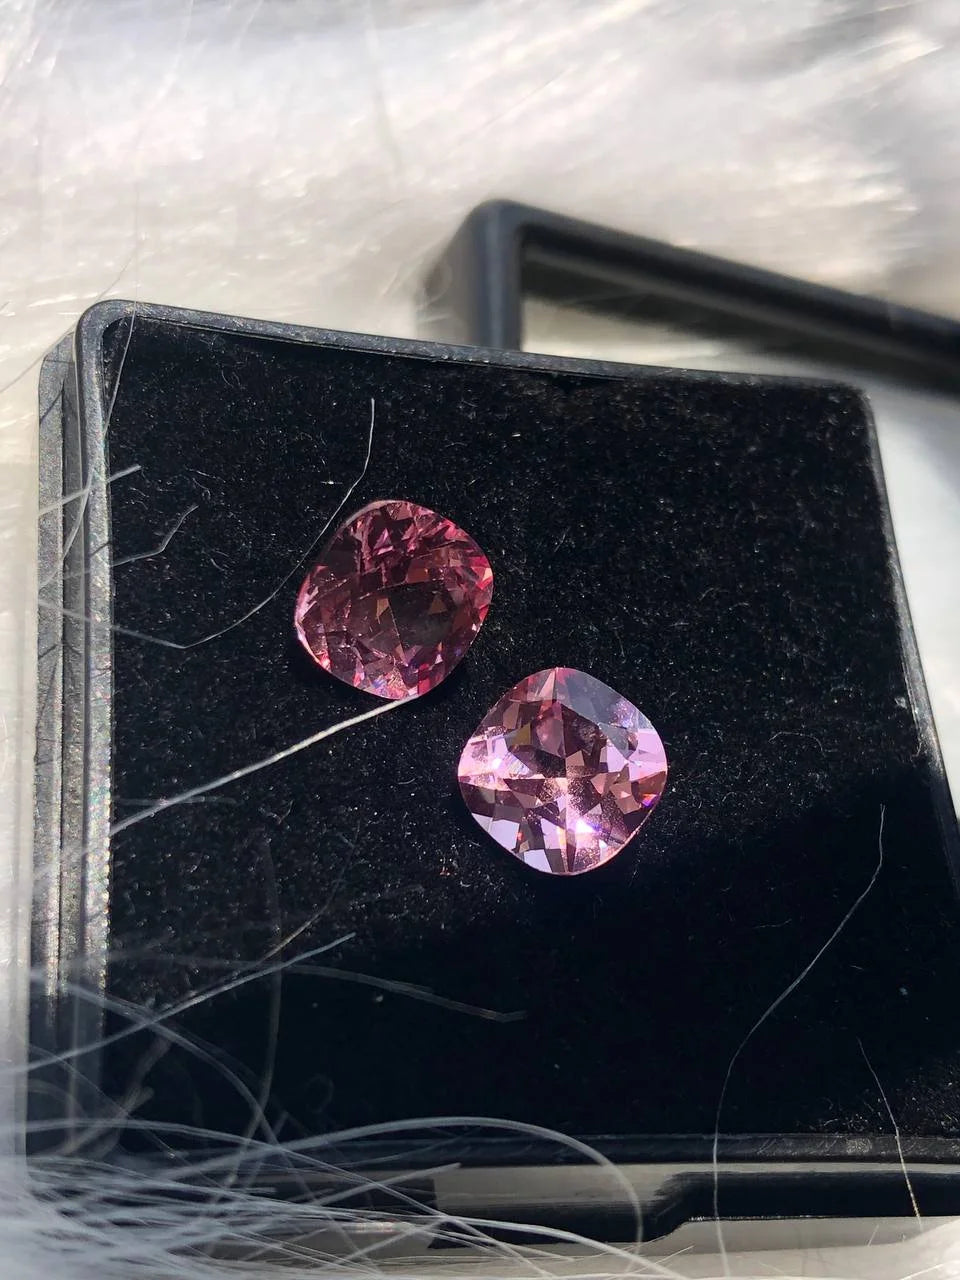 5.545 CT Cushion Cut Pink Sapphire Loose Gemstone Ideal For Stunning Earrings